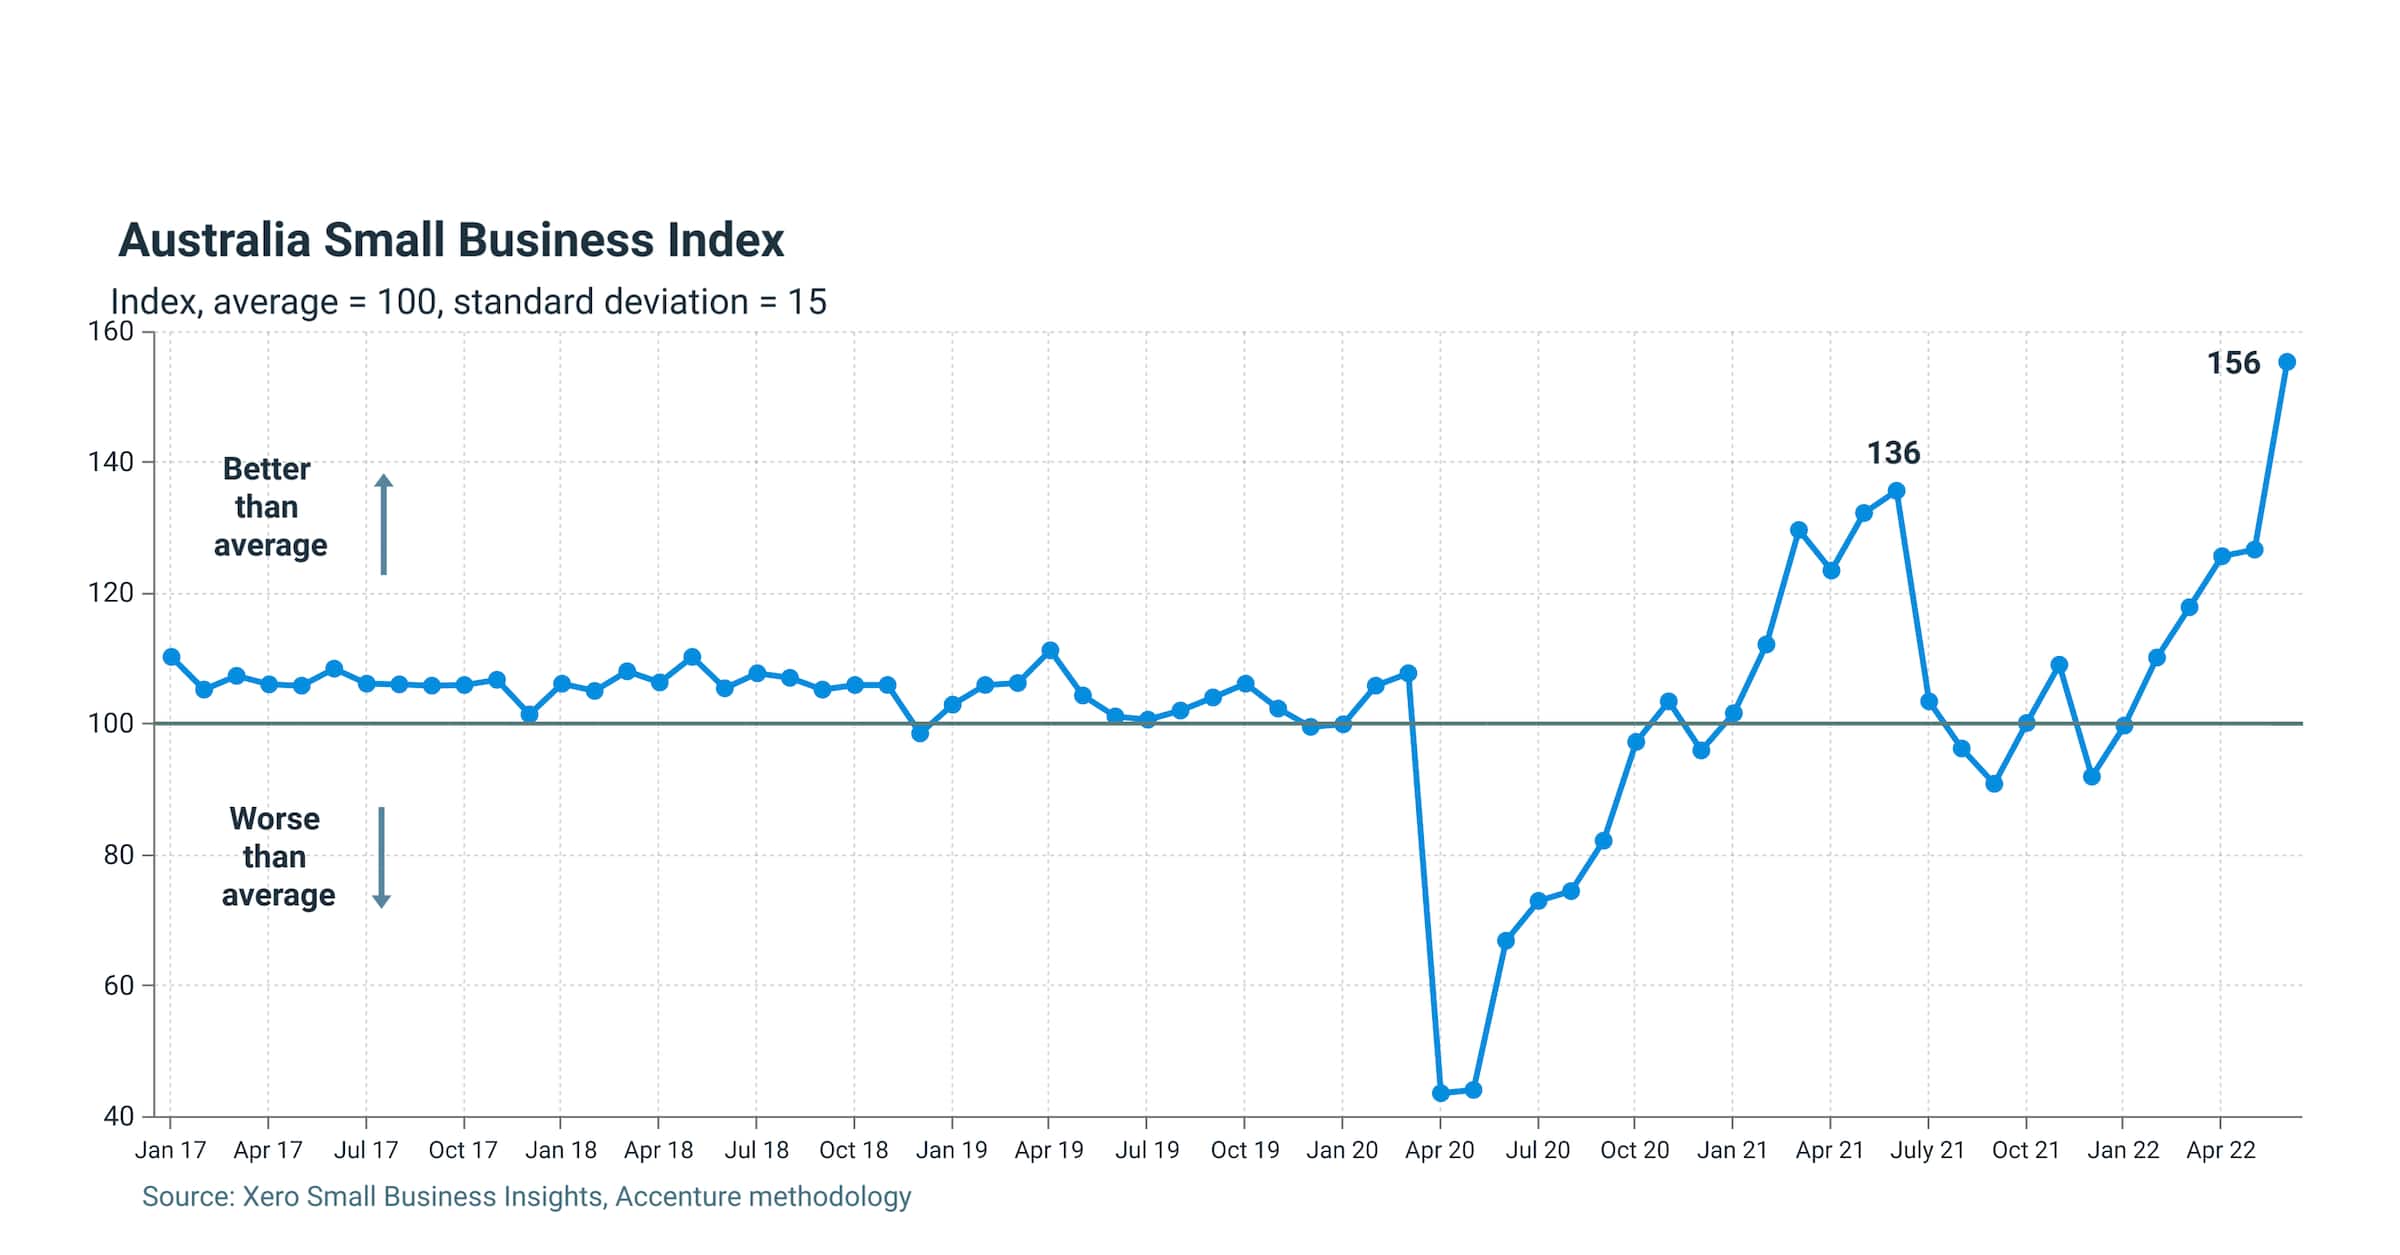 Australia Small Business Index indicating 29 point rise to 156 points